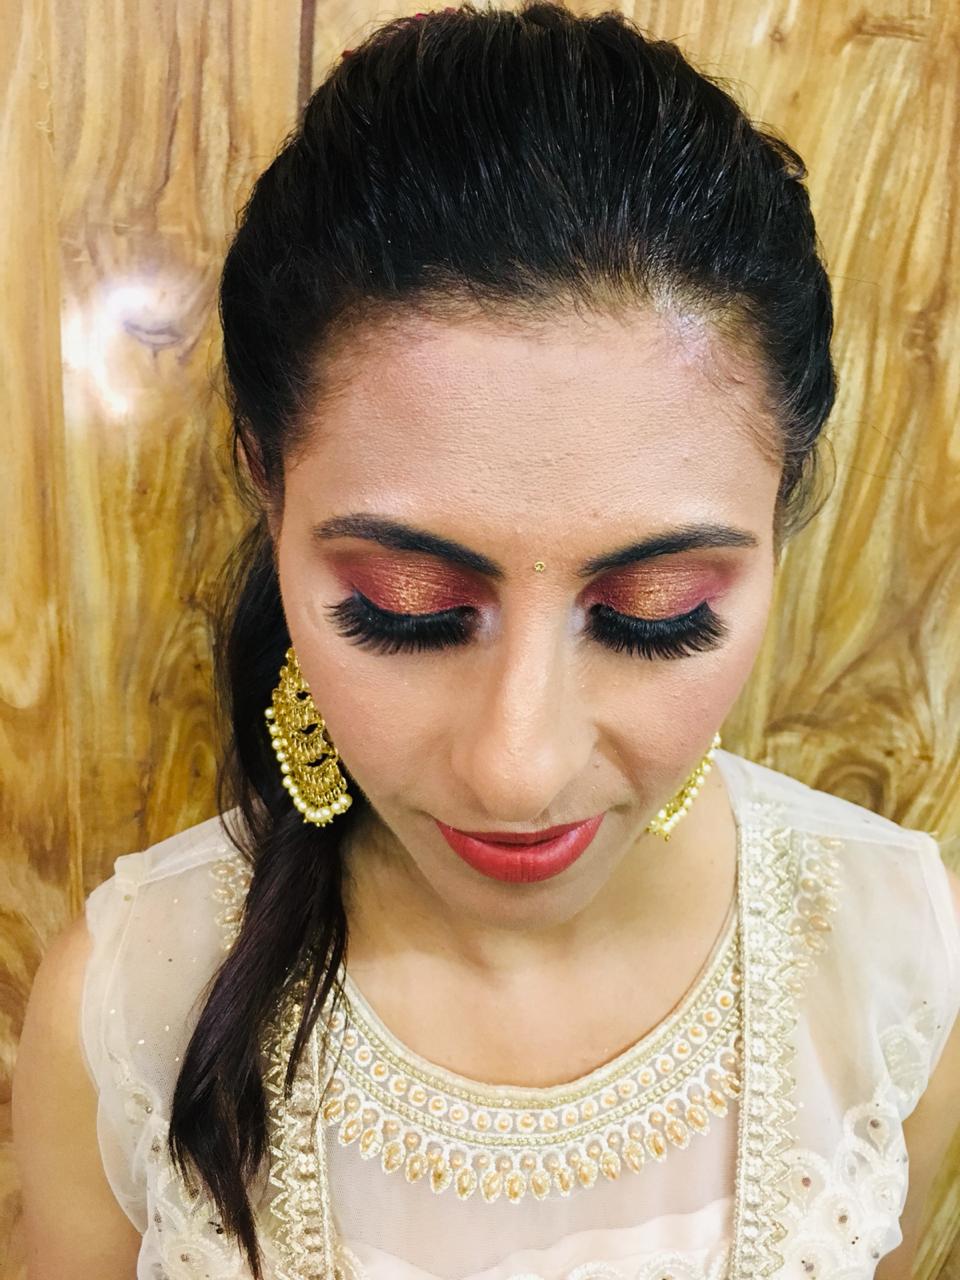 Makeup by JR Gurgaon Makeup Artist Services, Review and